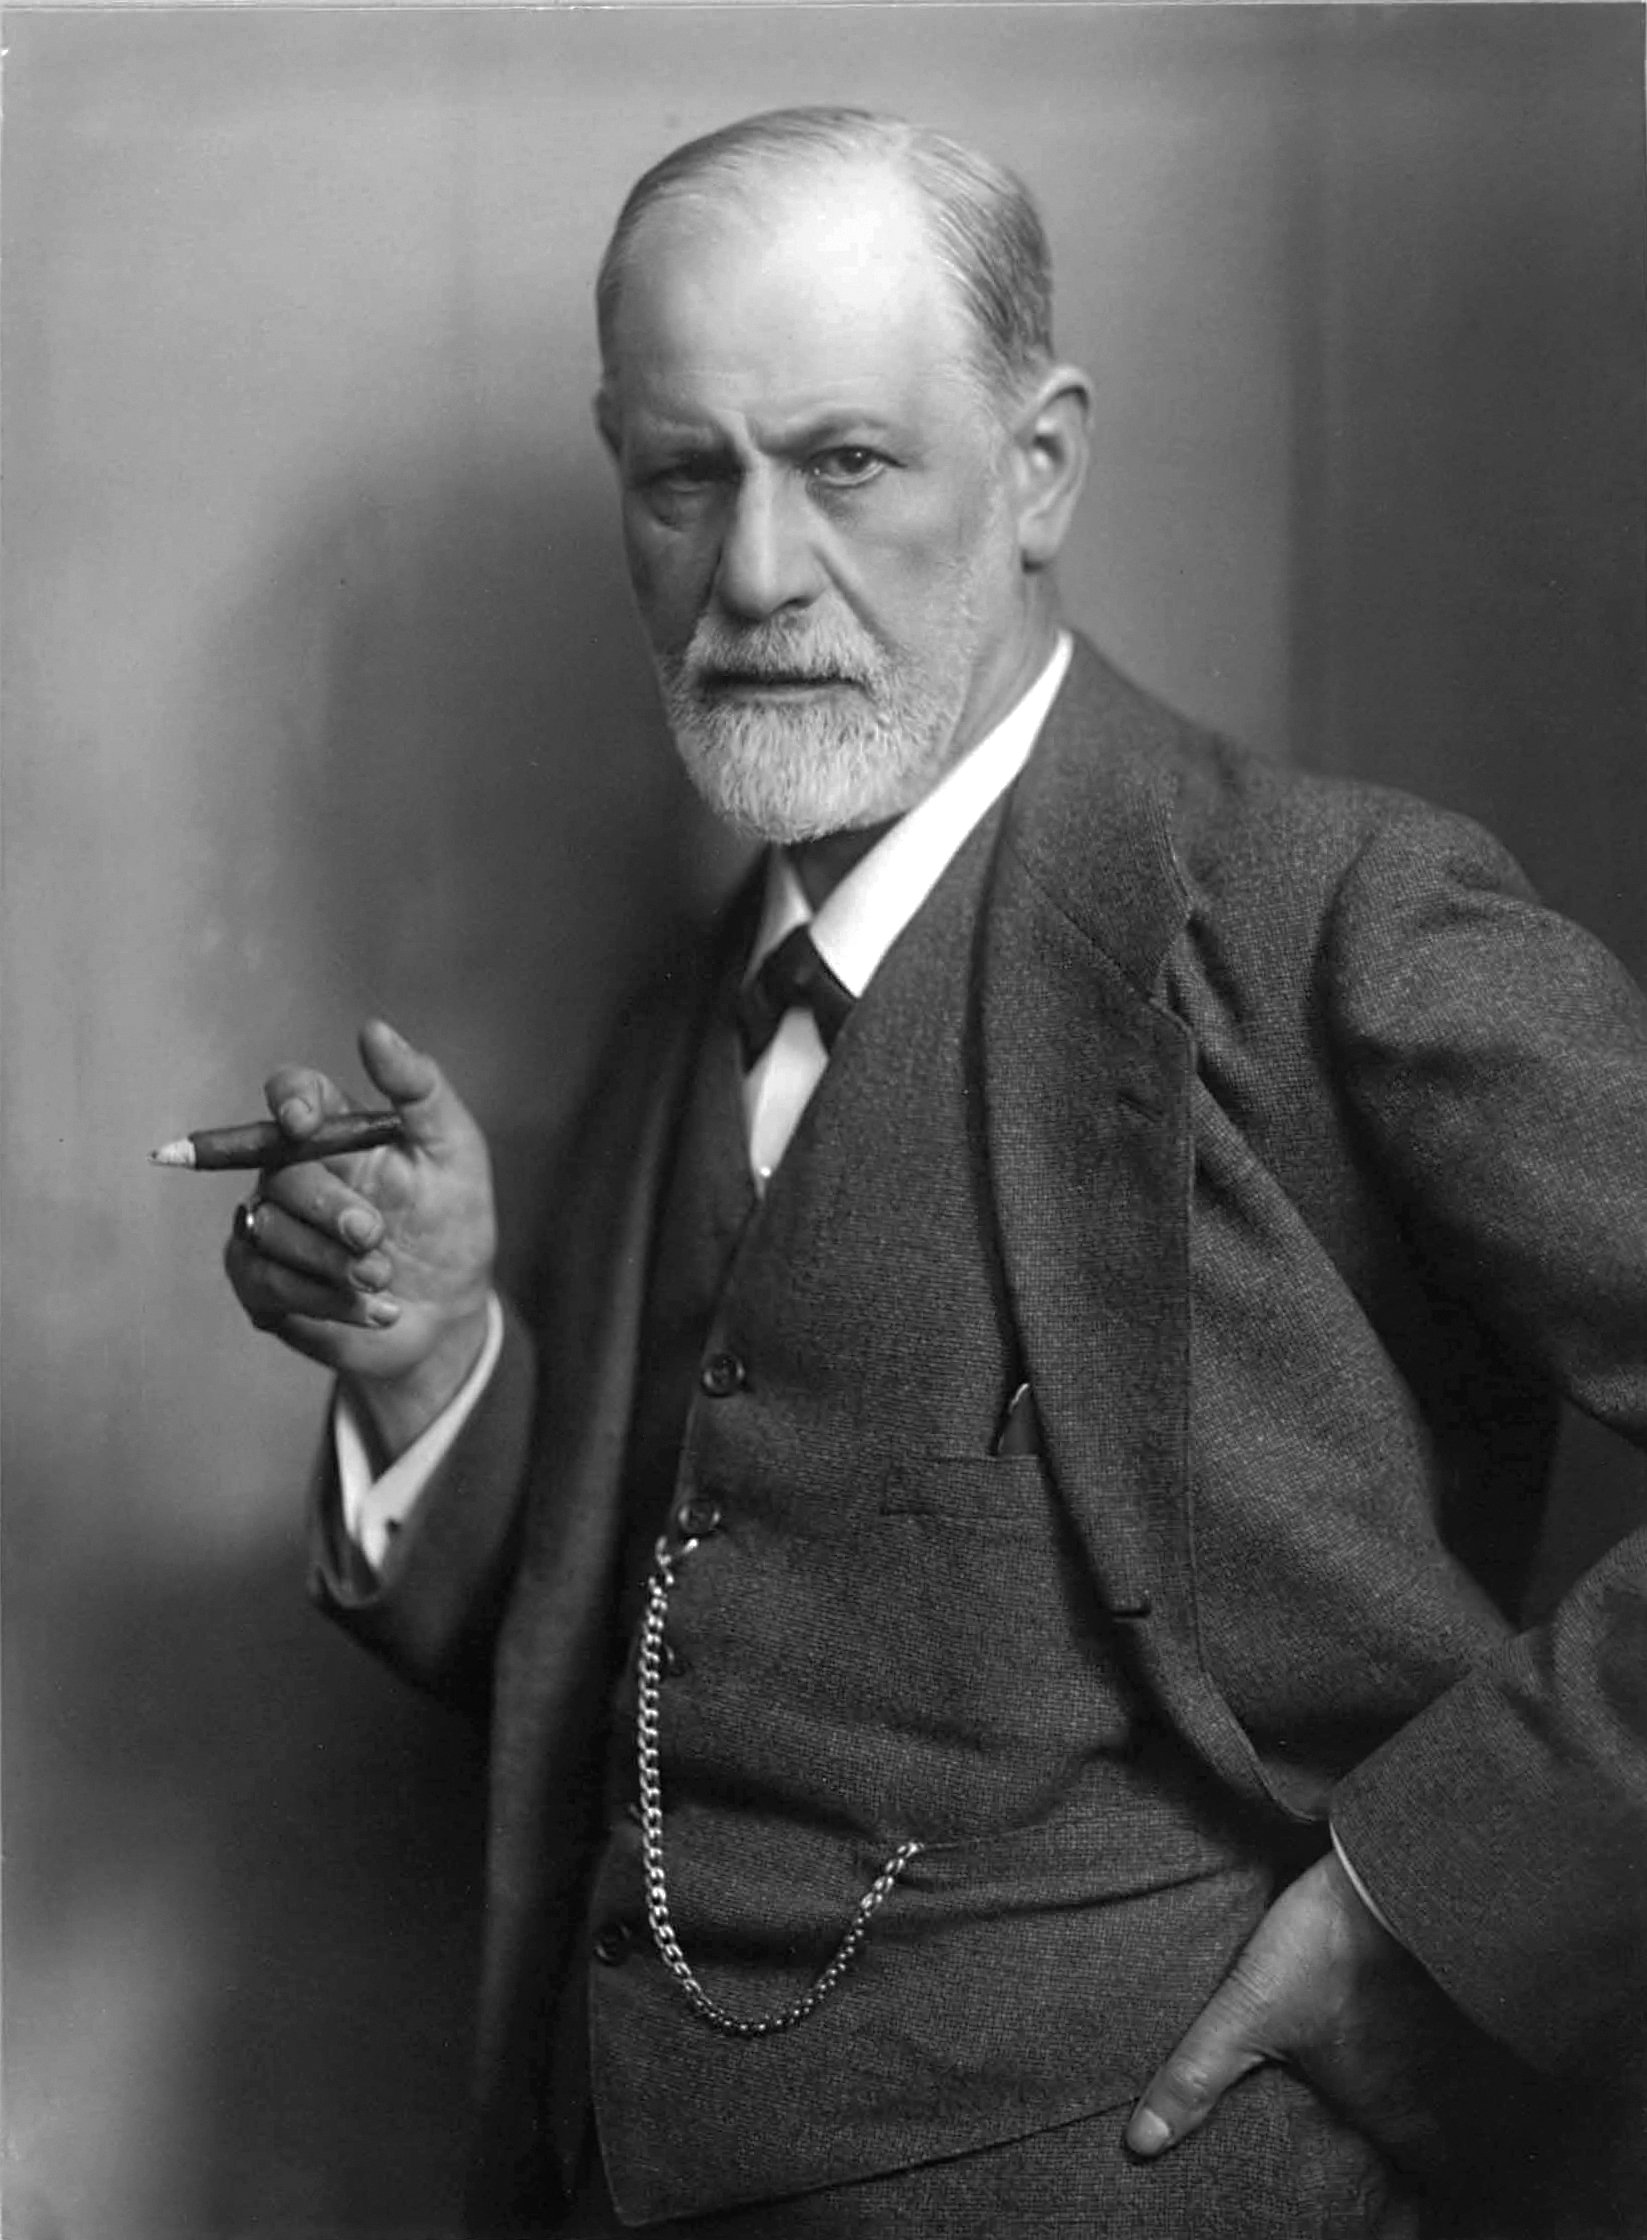 Sigmund Freud the Inventor of Psychoanalysis Deluded Himself Into